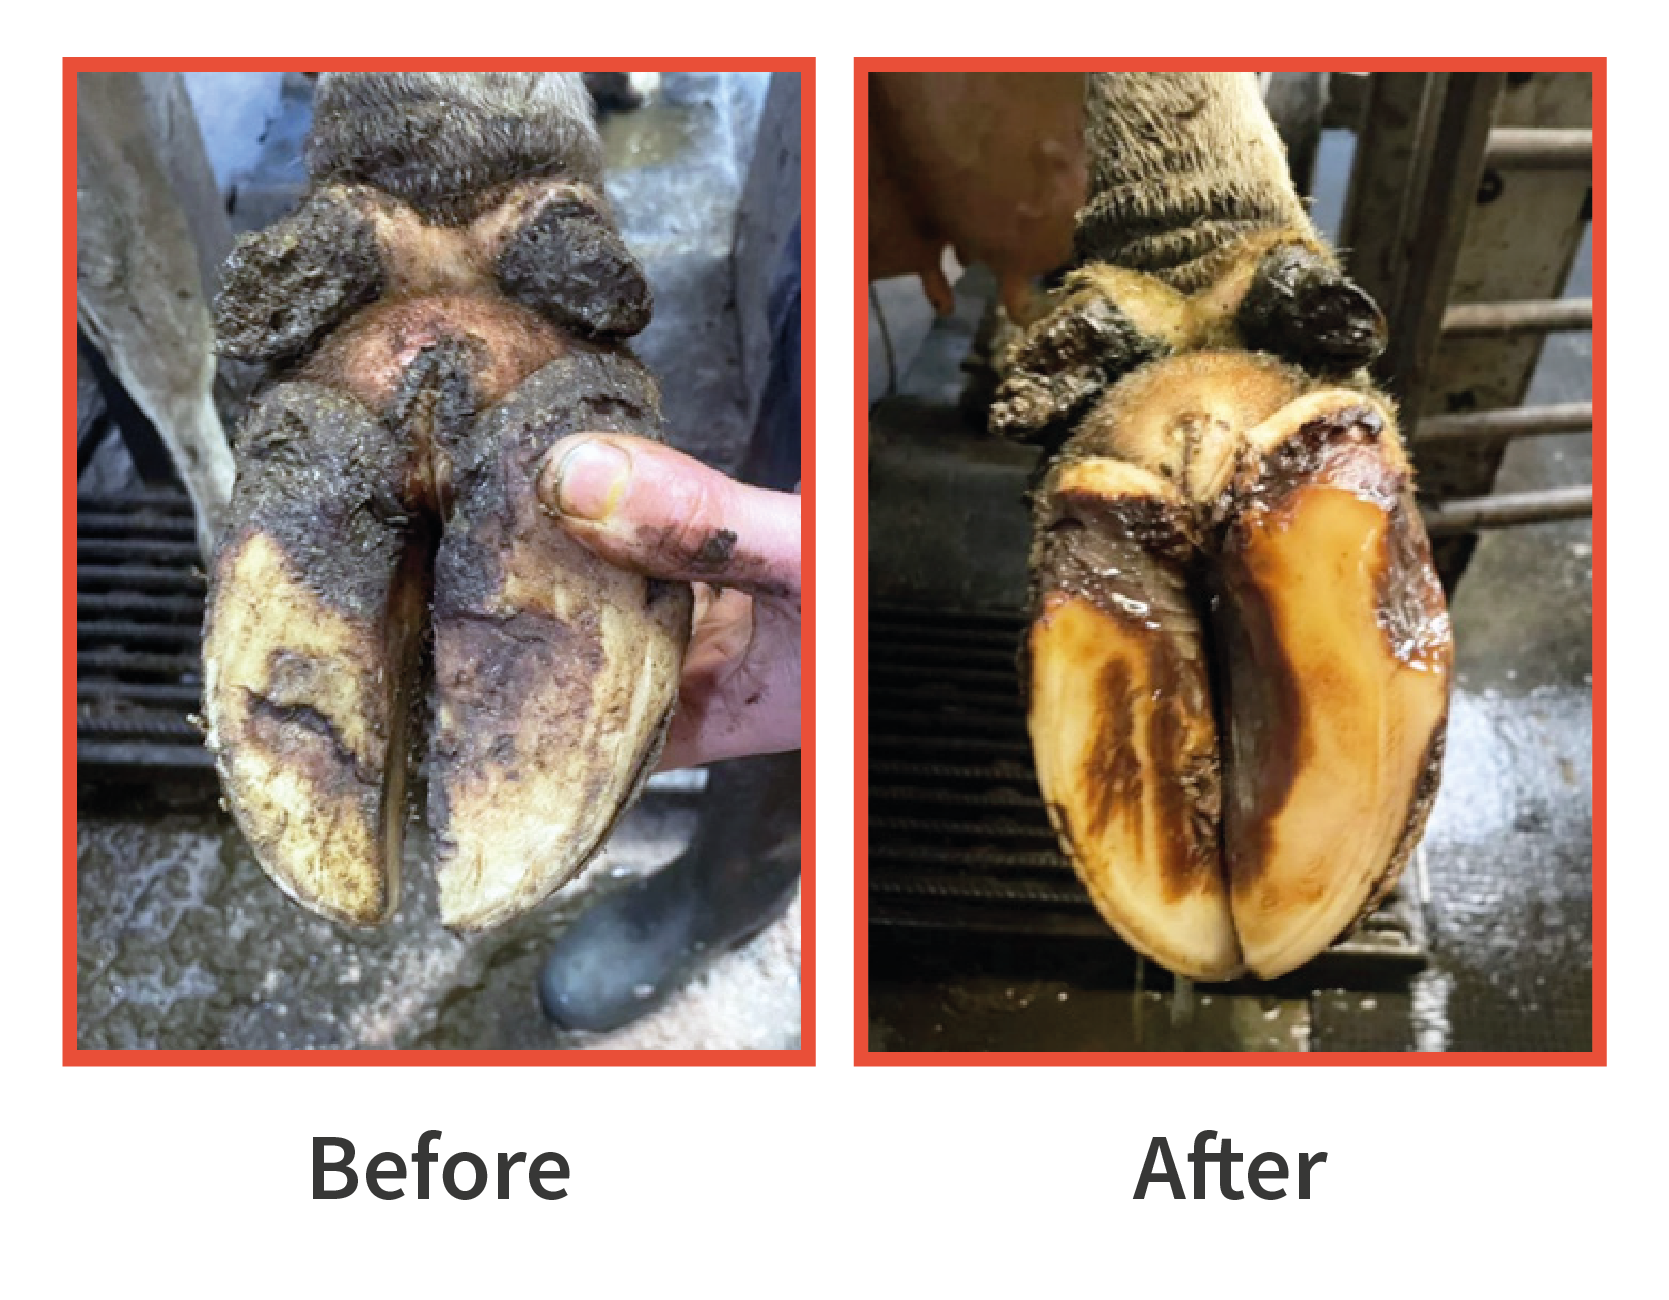 Before and after pictures showing an unhealthy hoof on the left and the same hoof healthy on the right.